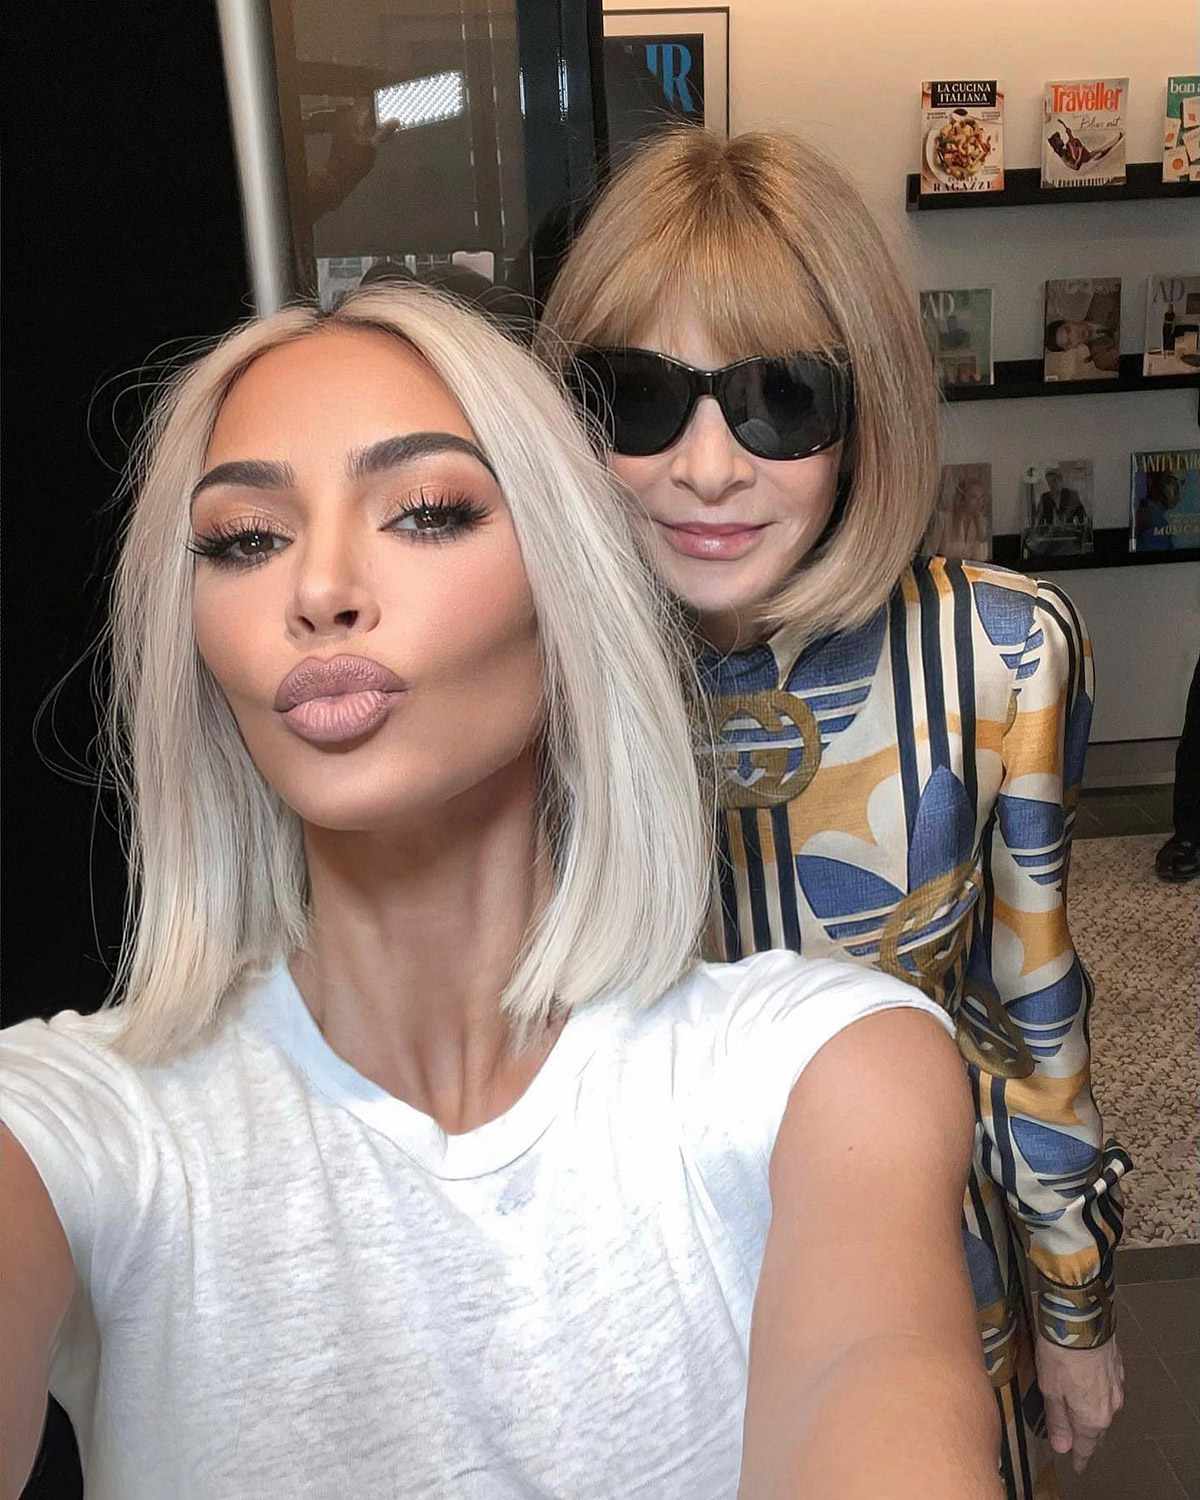 Kim Kardashian Says She and Anna Wintour Are ‘Bobbsey Twins’ in Epic Instagram Selfie